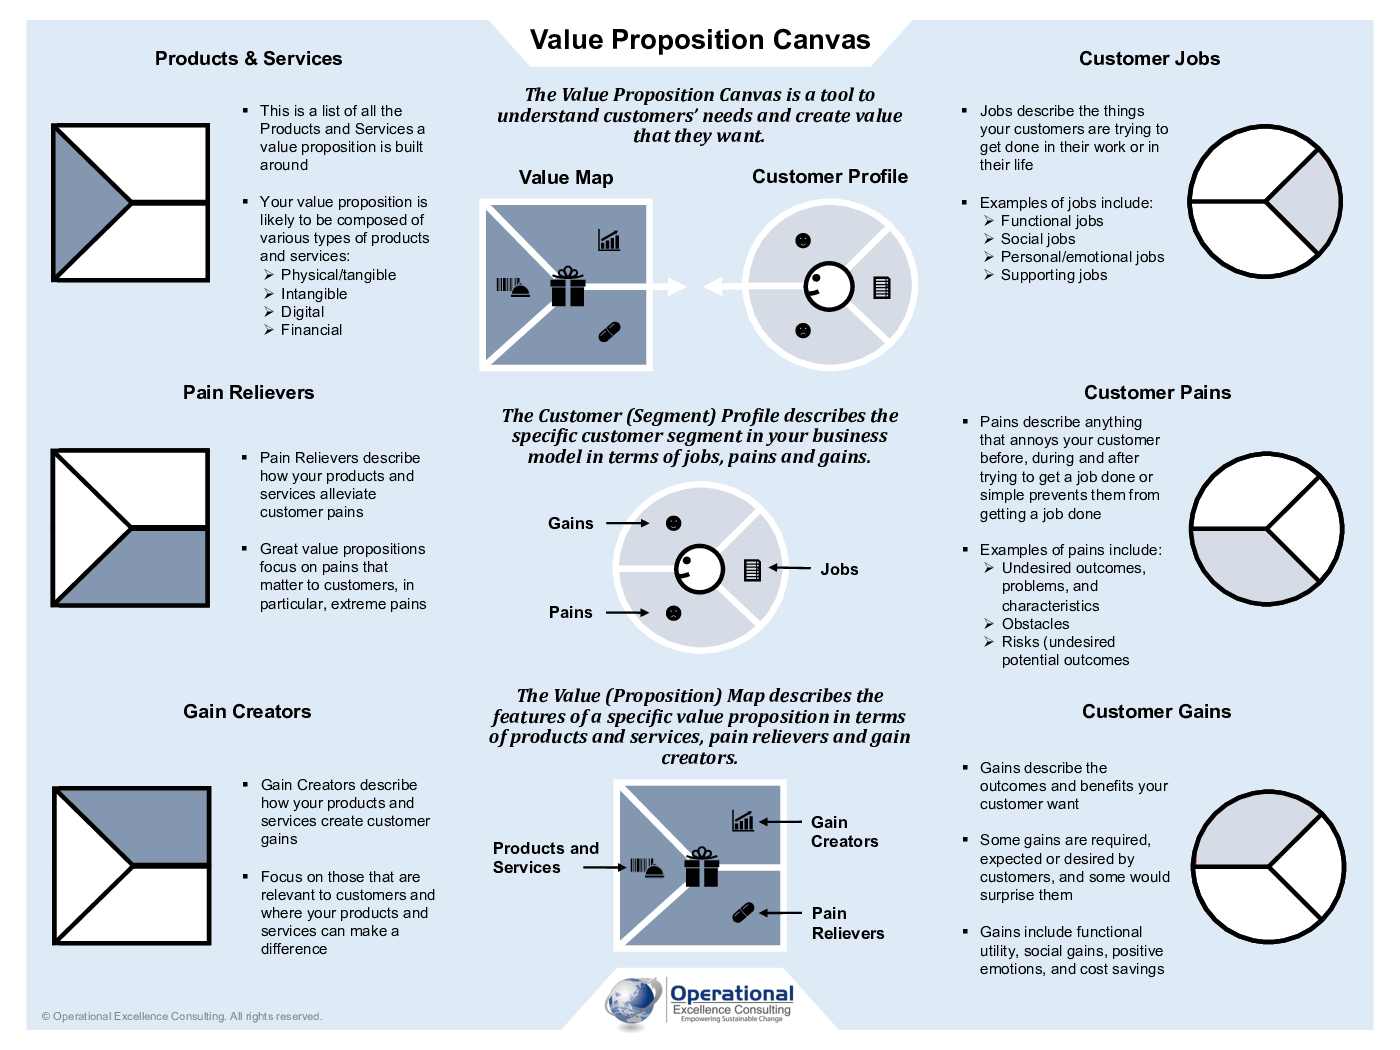 Value Proposition Canvas (VPC) Poster